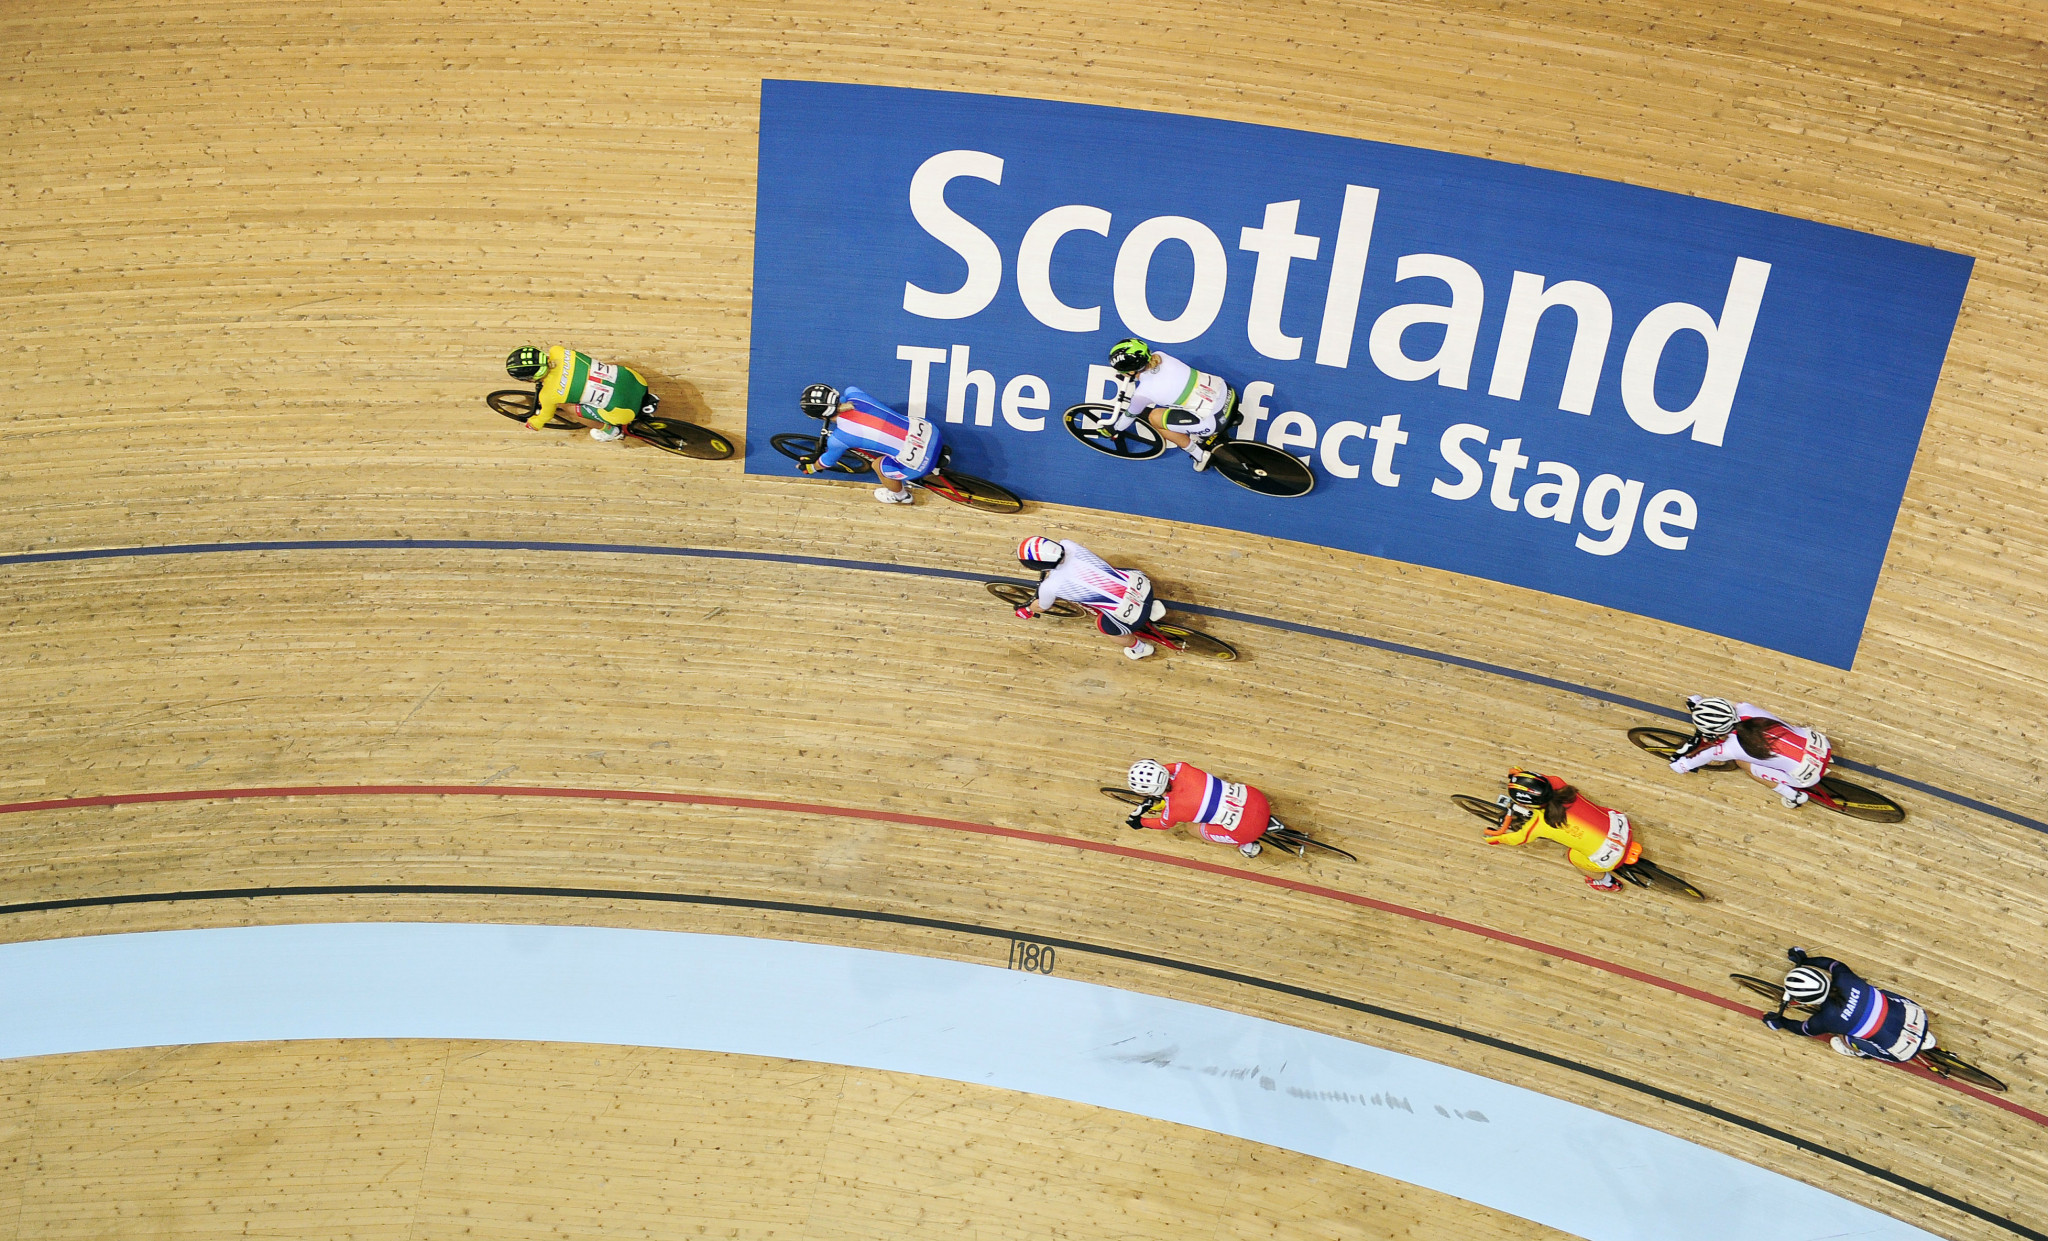 Scotland to host inaugural combined UCI World Championships in 2023